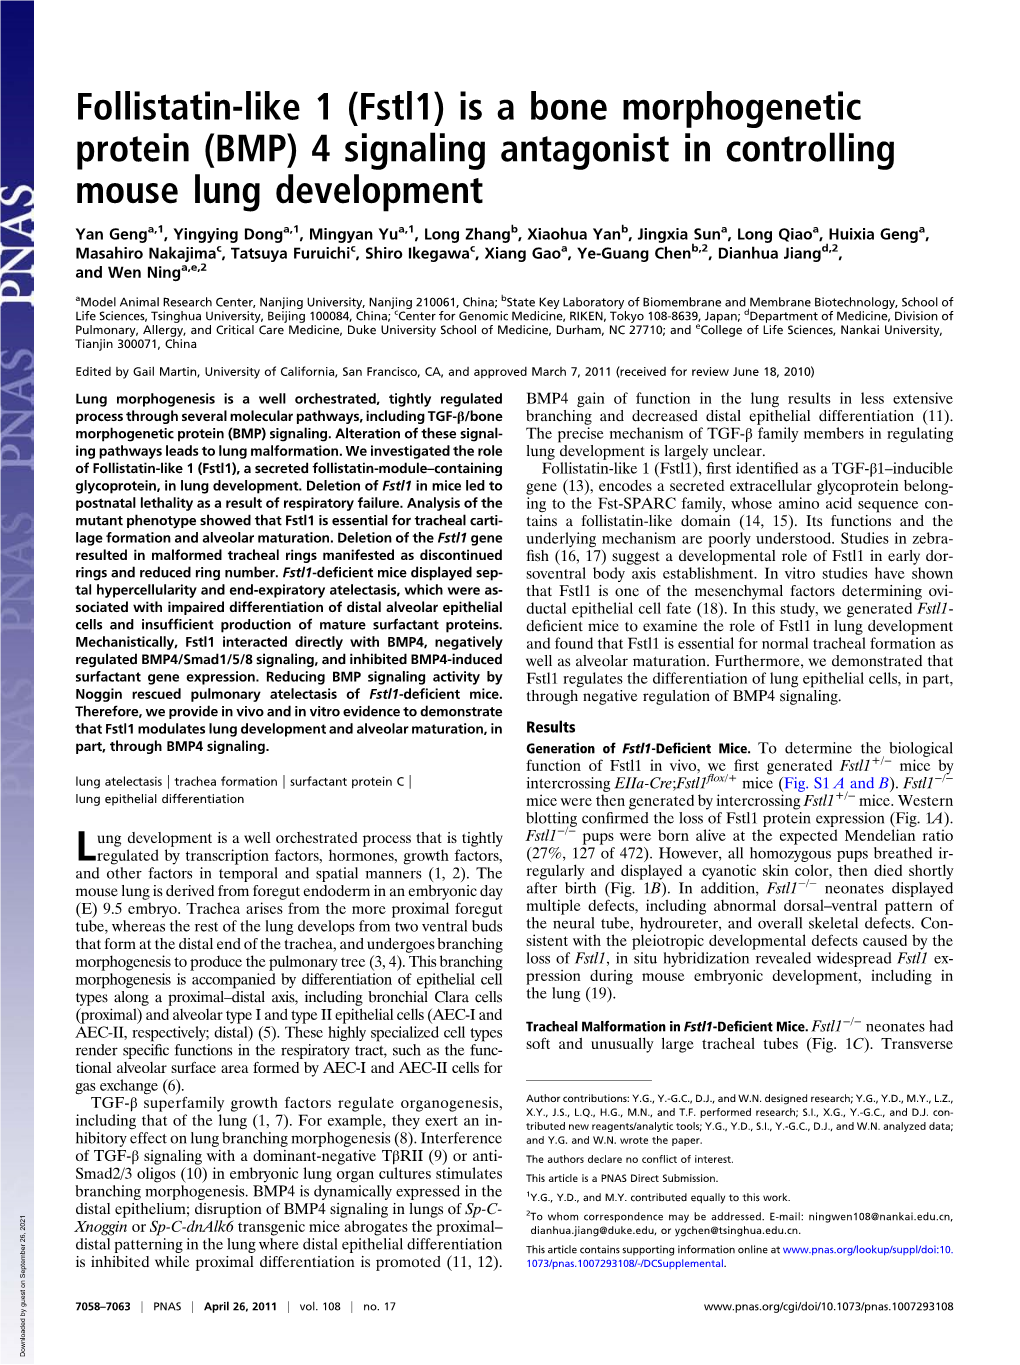 (BMP) 4 Signaling Antagonist in Controlling Mouse Lung Development